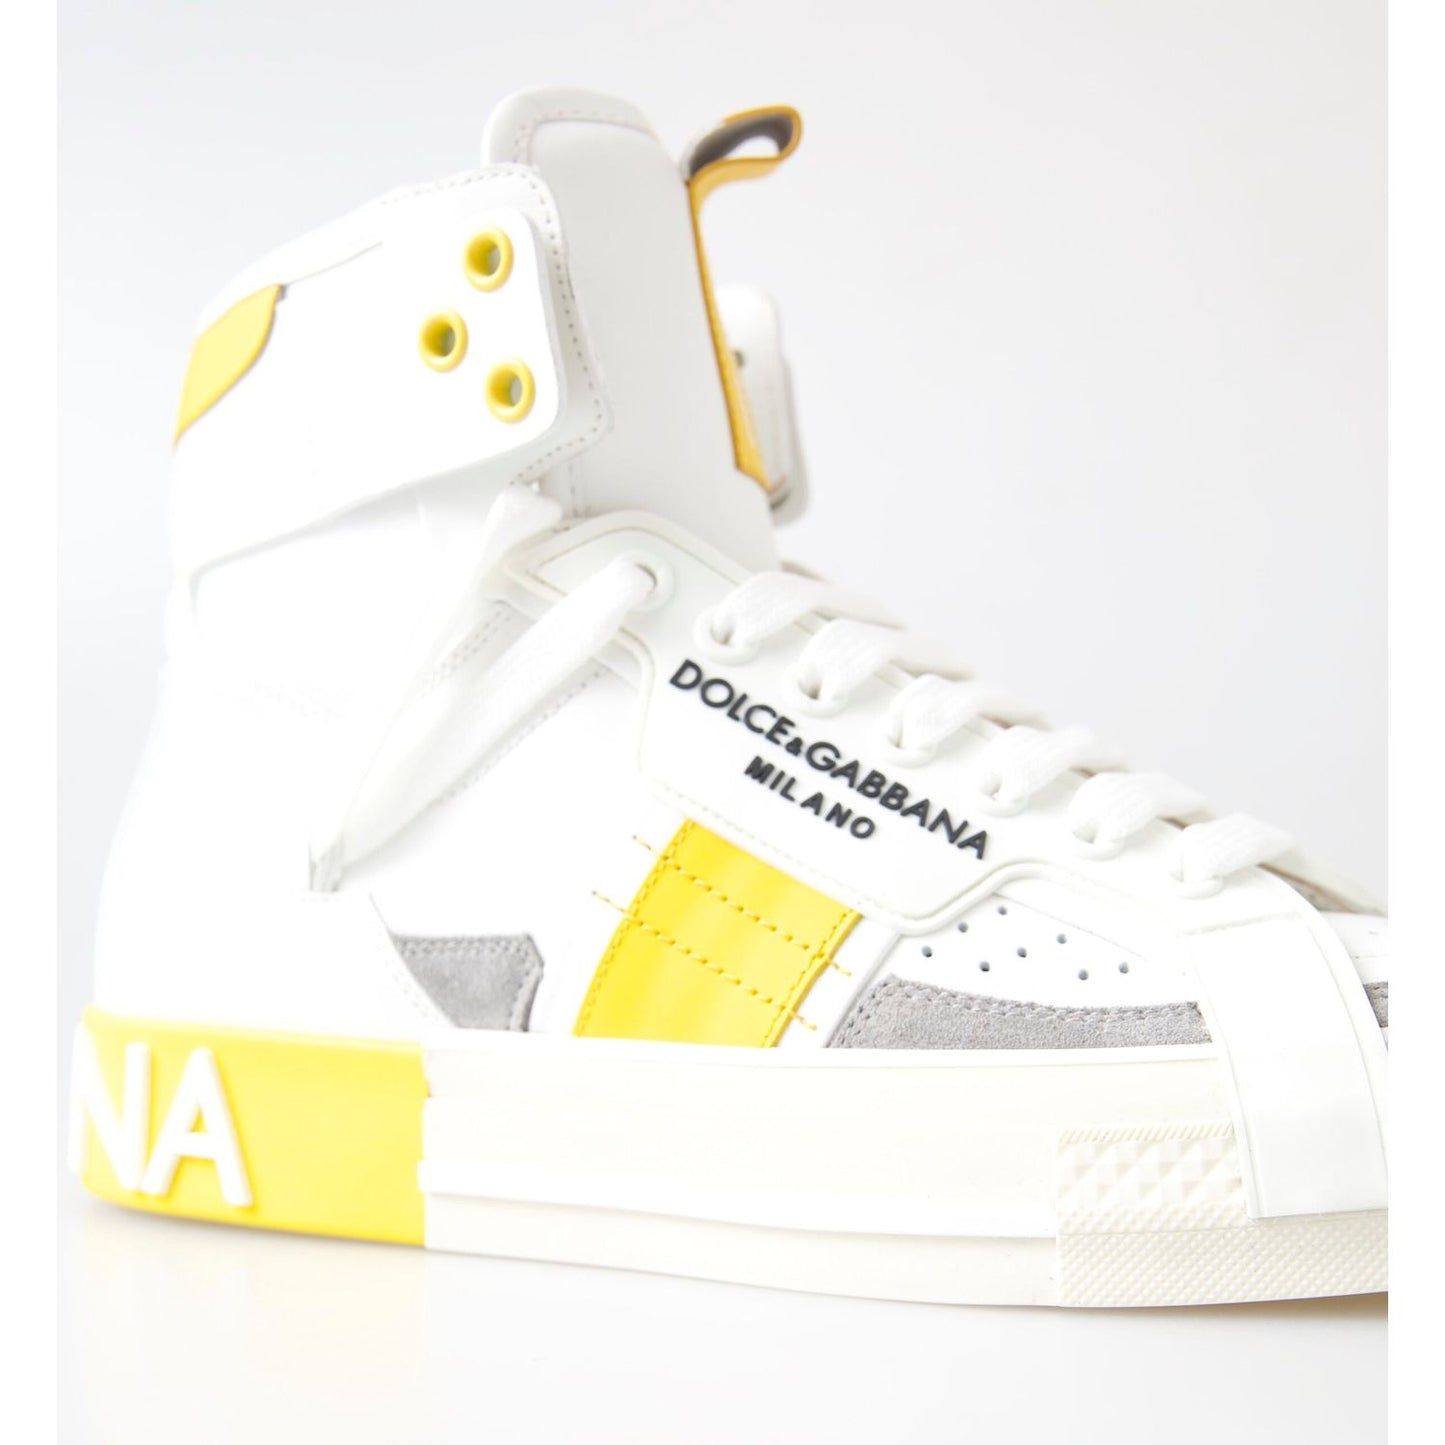 Dolce & Gabbana | High-Top Perforated Leather Sneakers| McRichard Designer Brands   